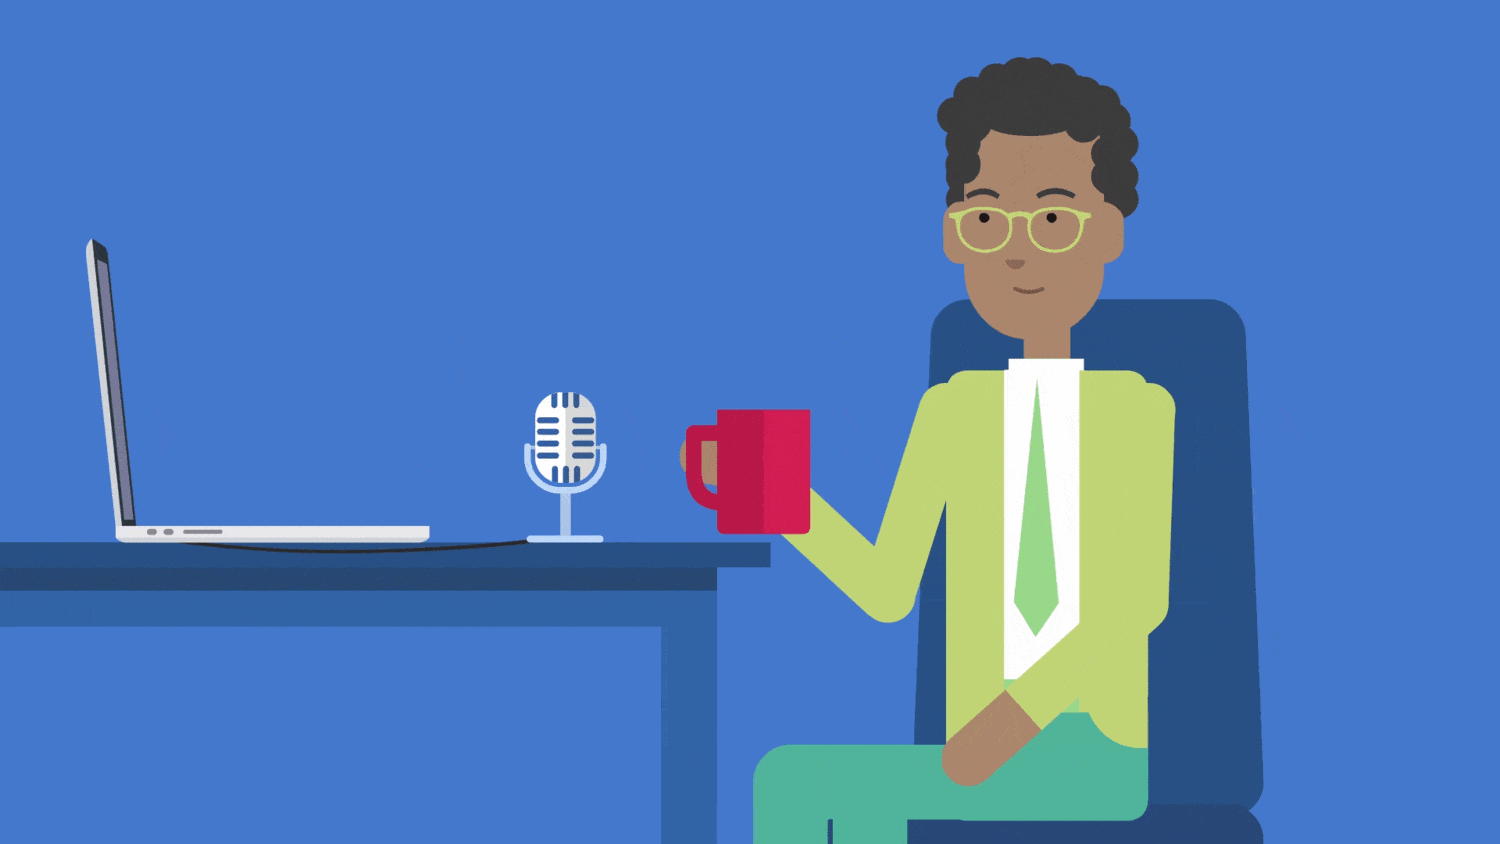 Image displaying one of the expert tips to improve voice over skills. Animated character is sitting down and taking a sip of a hot drink.